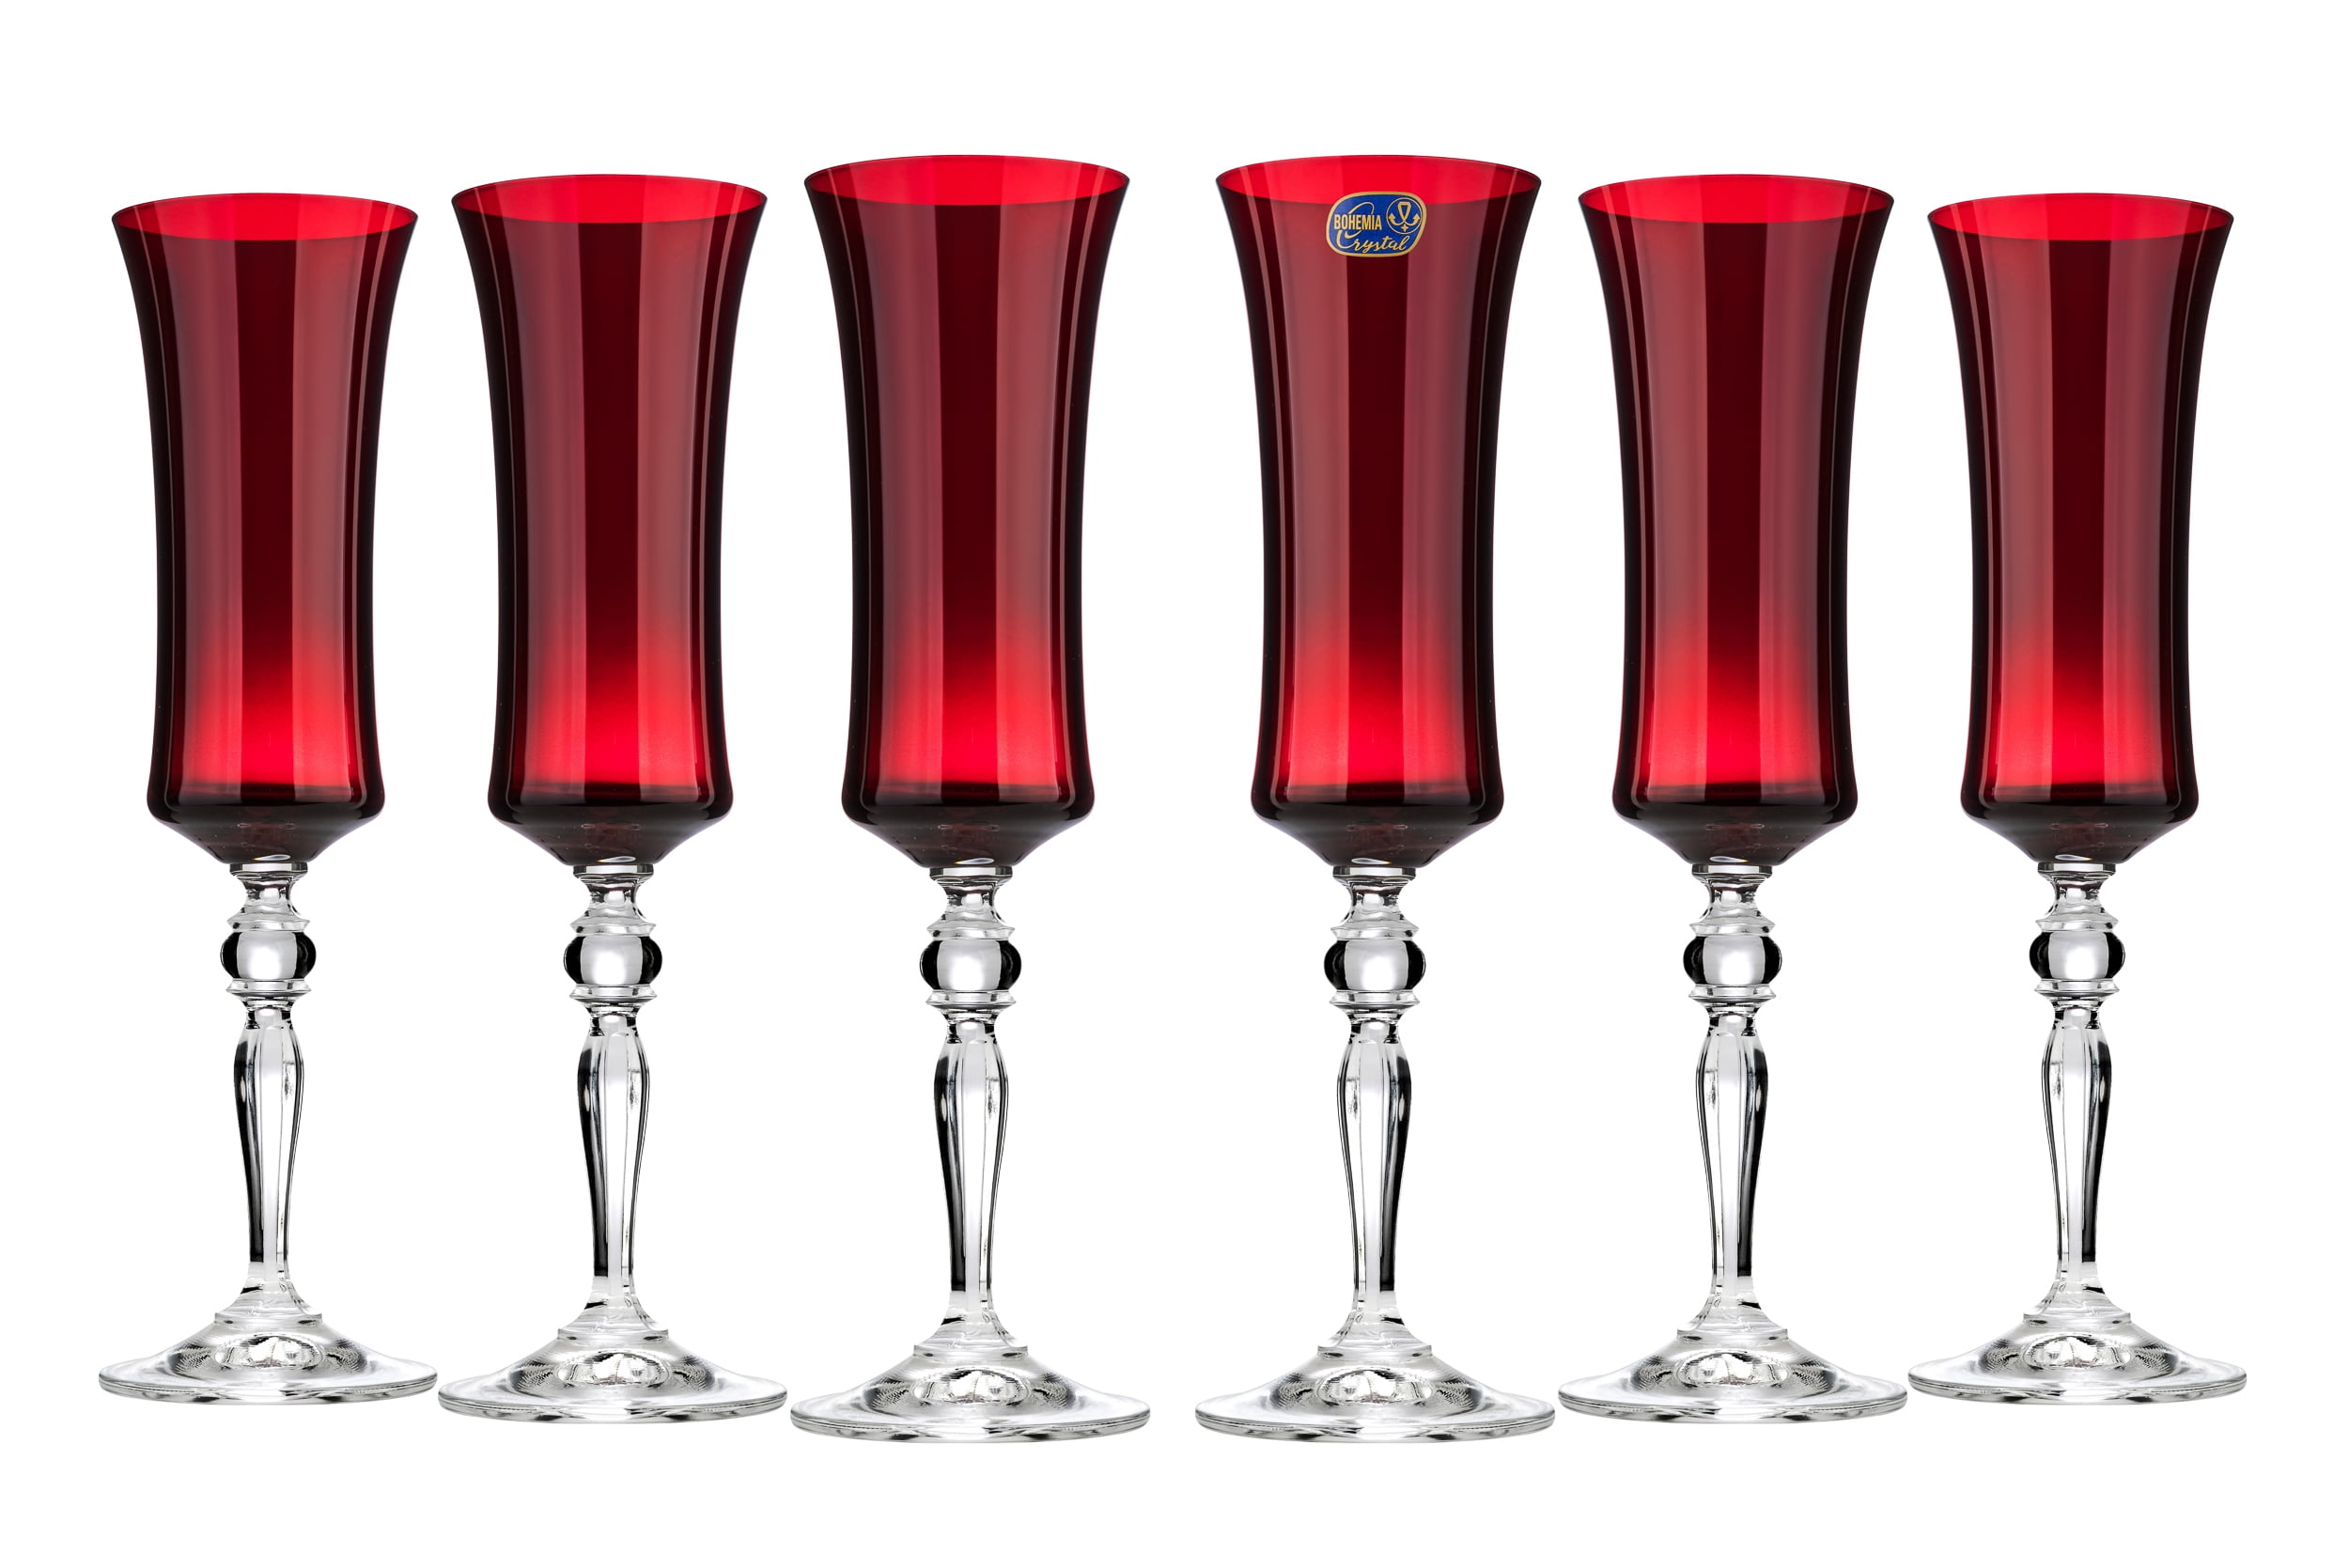 Bohemia Crystal 40792/190/382840 6 Oz Crystal Champagne Flutes, Red  Old-Fashioned Glasses on a Long Stem, Set of 6 